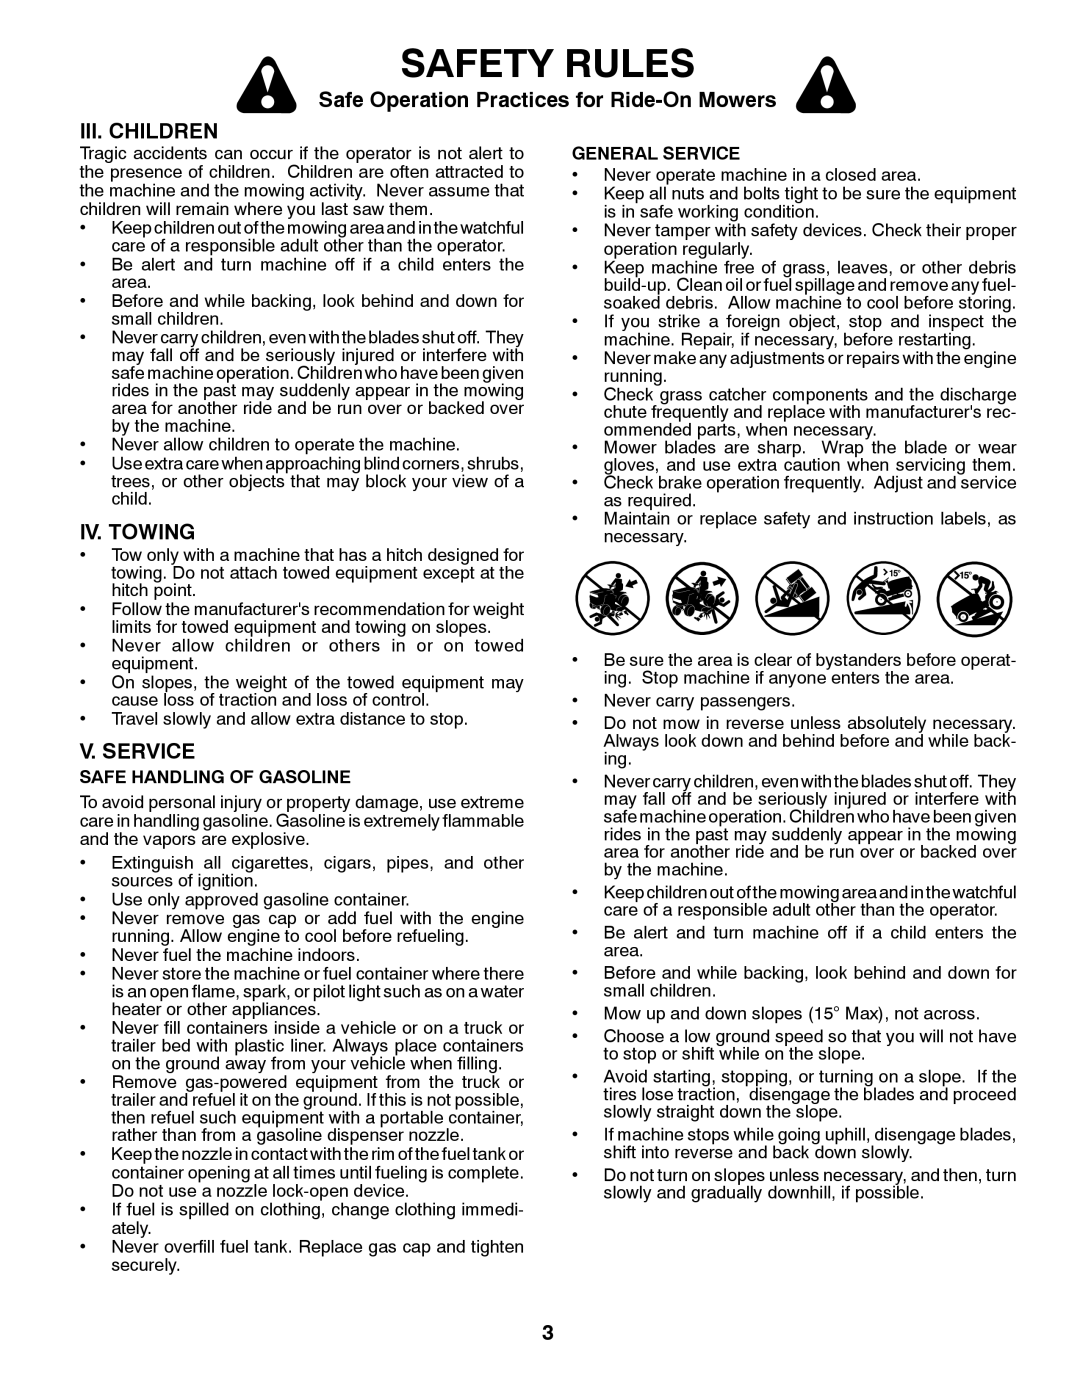 Poulan 432448 manual Iii. Children, Iv. Towing, V. Service, Safety Rules, Safe Operation Practices for Ride-On Mowers 